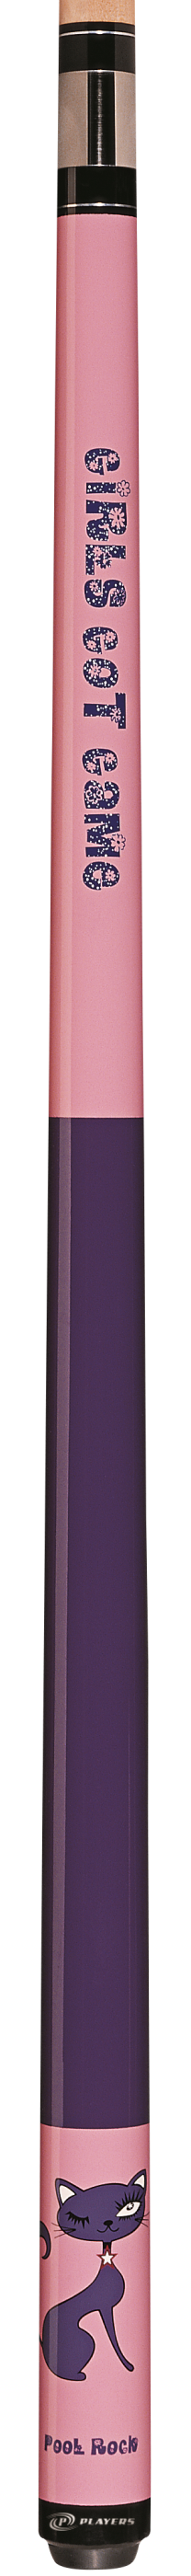 Players Y-G02-48  Youth Cue 48" Pool Cue -Players